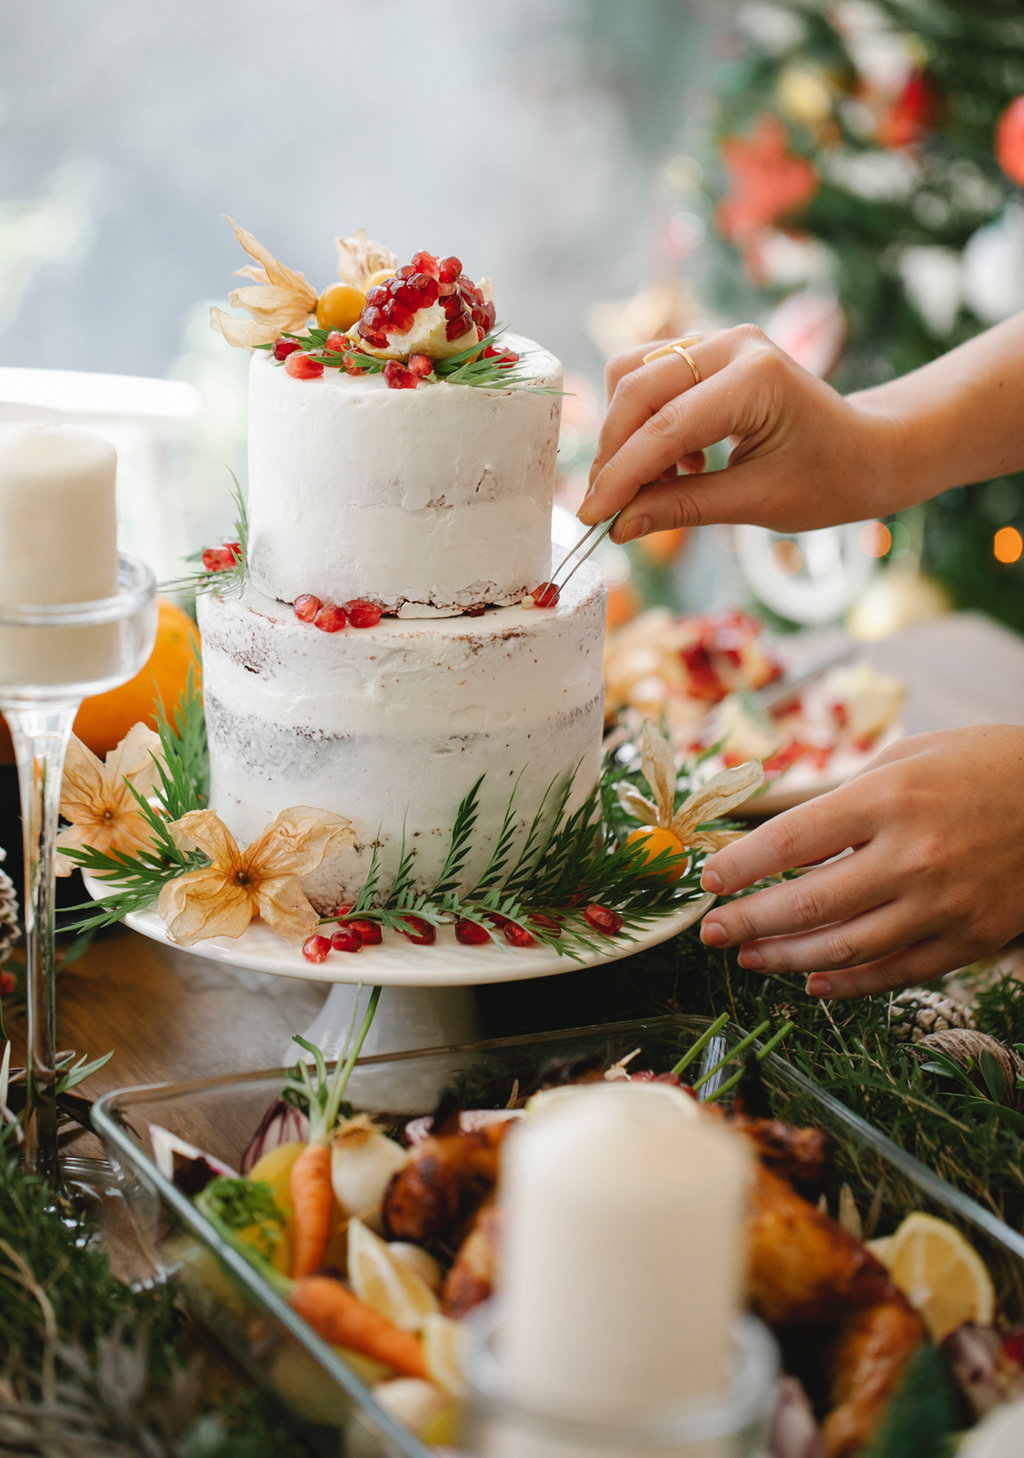 Why You Should Bake A Christmas Birthday Cake For Jesus & Make It A Family Tradition